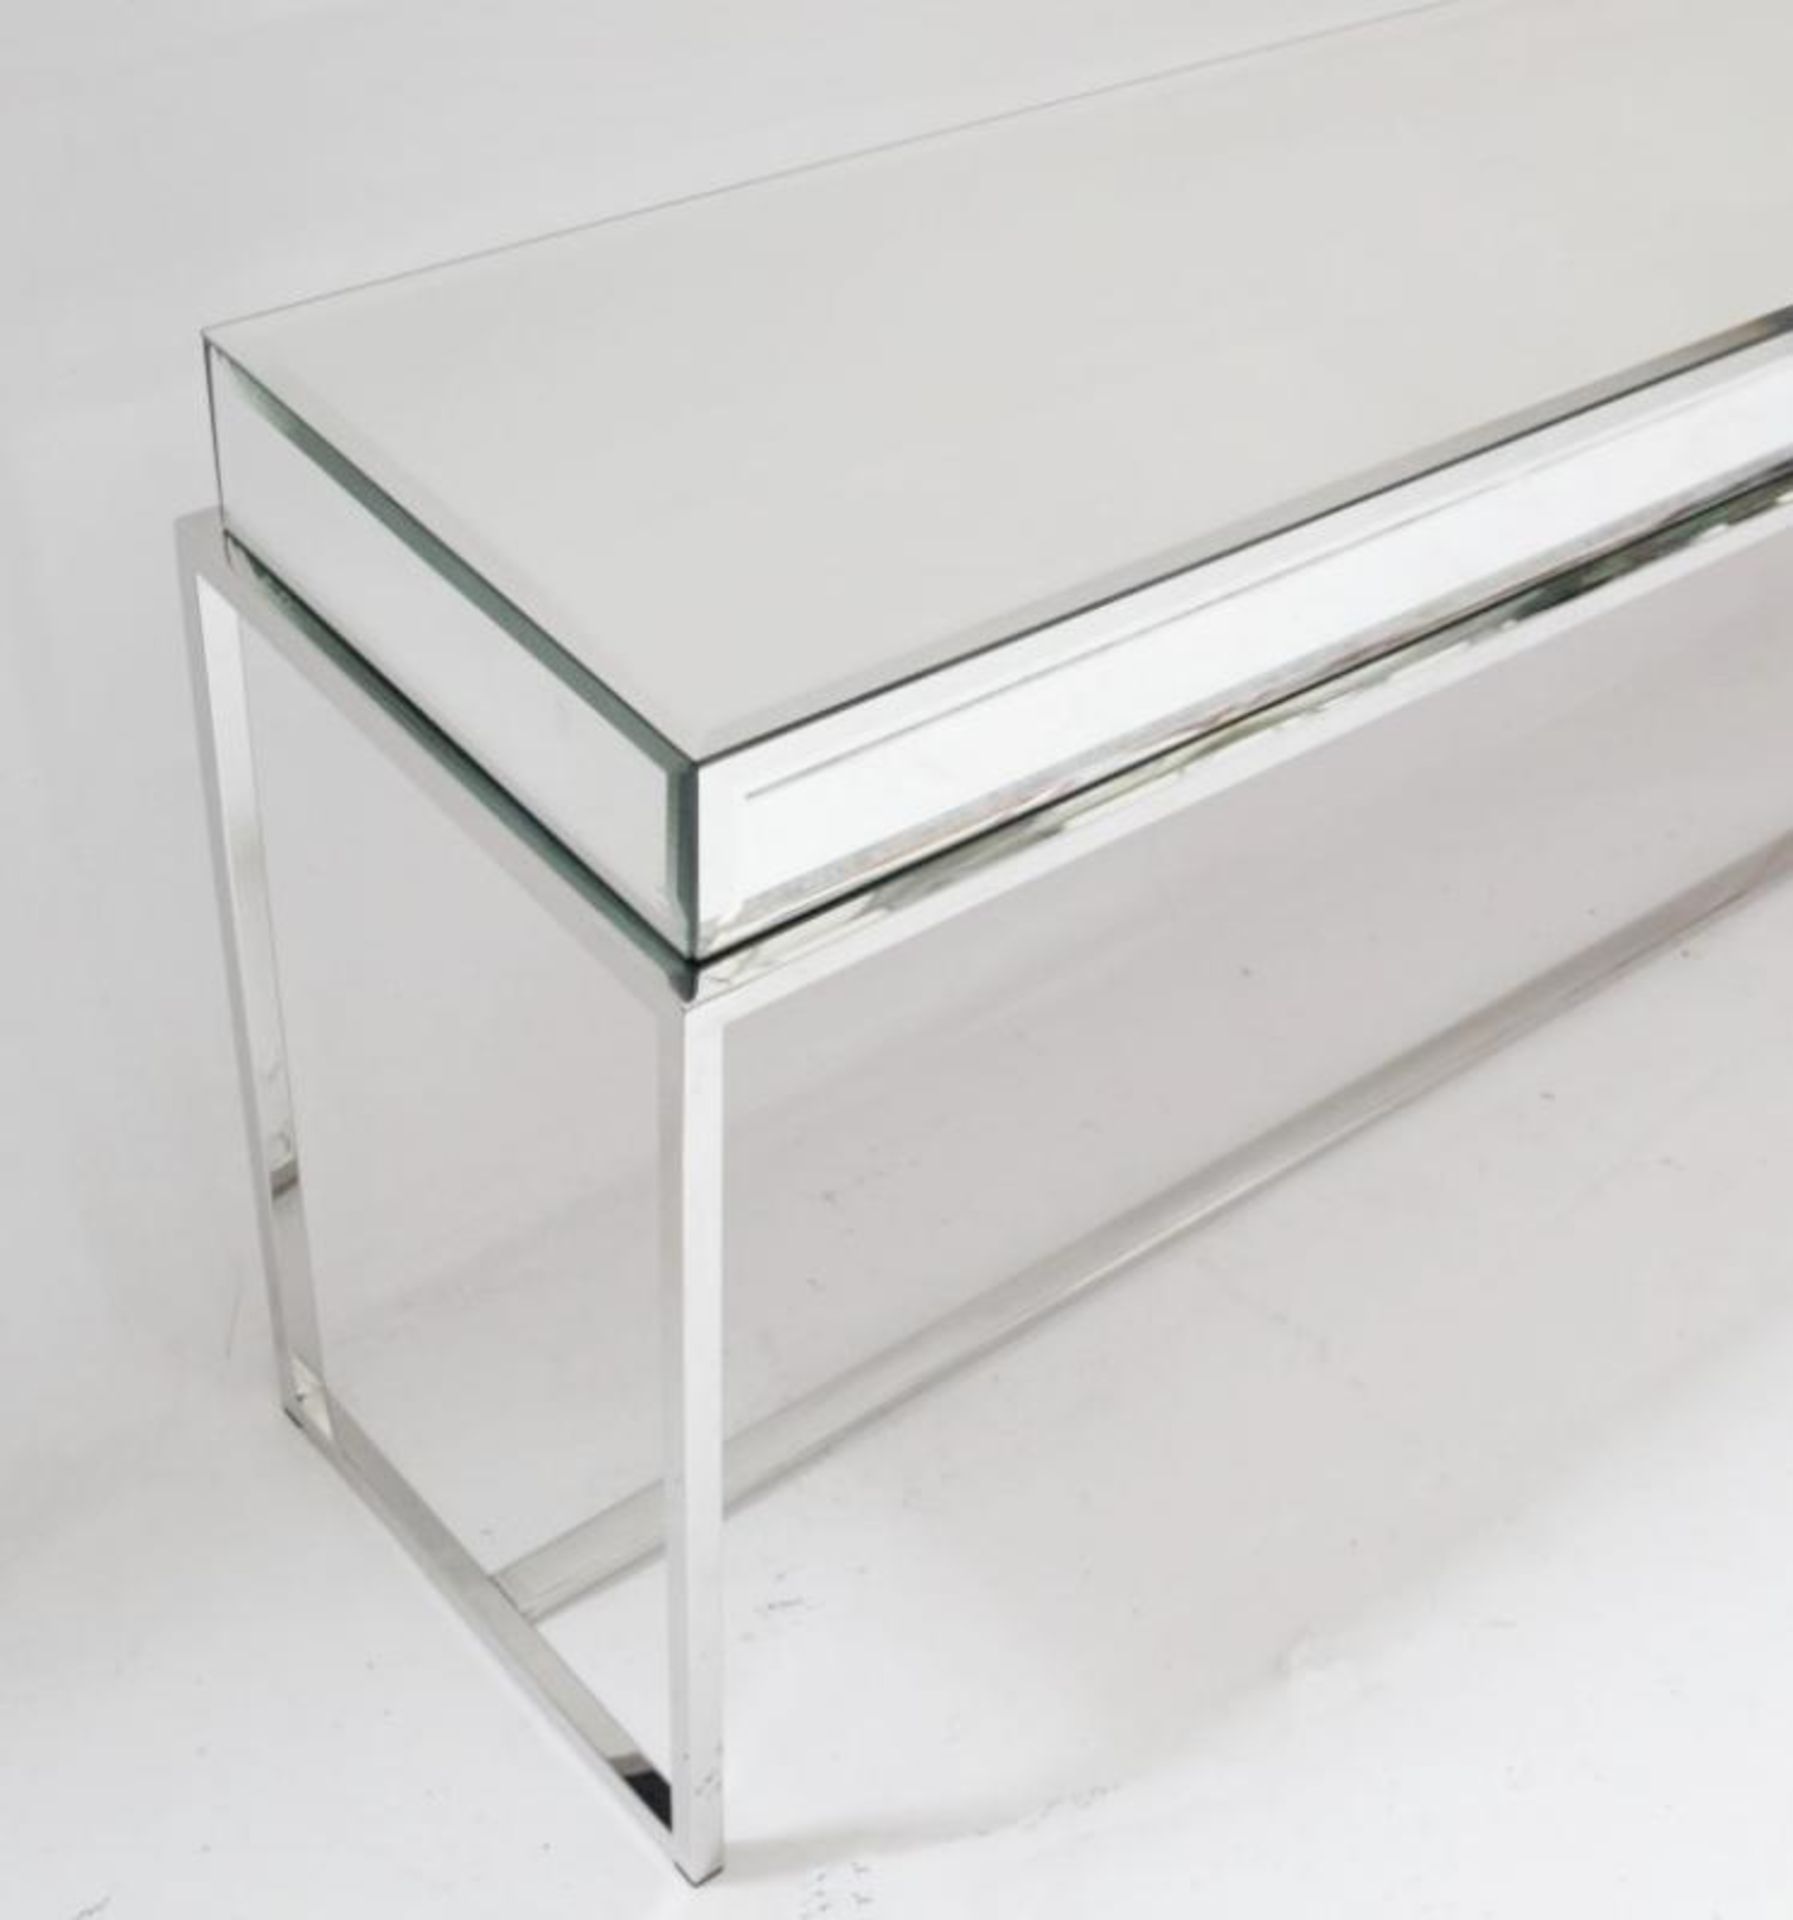 1 x EICHHOLTZ "Beverly Hills" Mirrored Glass Topped Console Table - Dimensions: W160 x D40 x H70 cm - Image 4 of 4